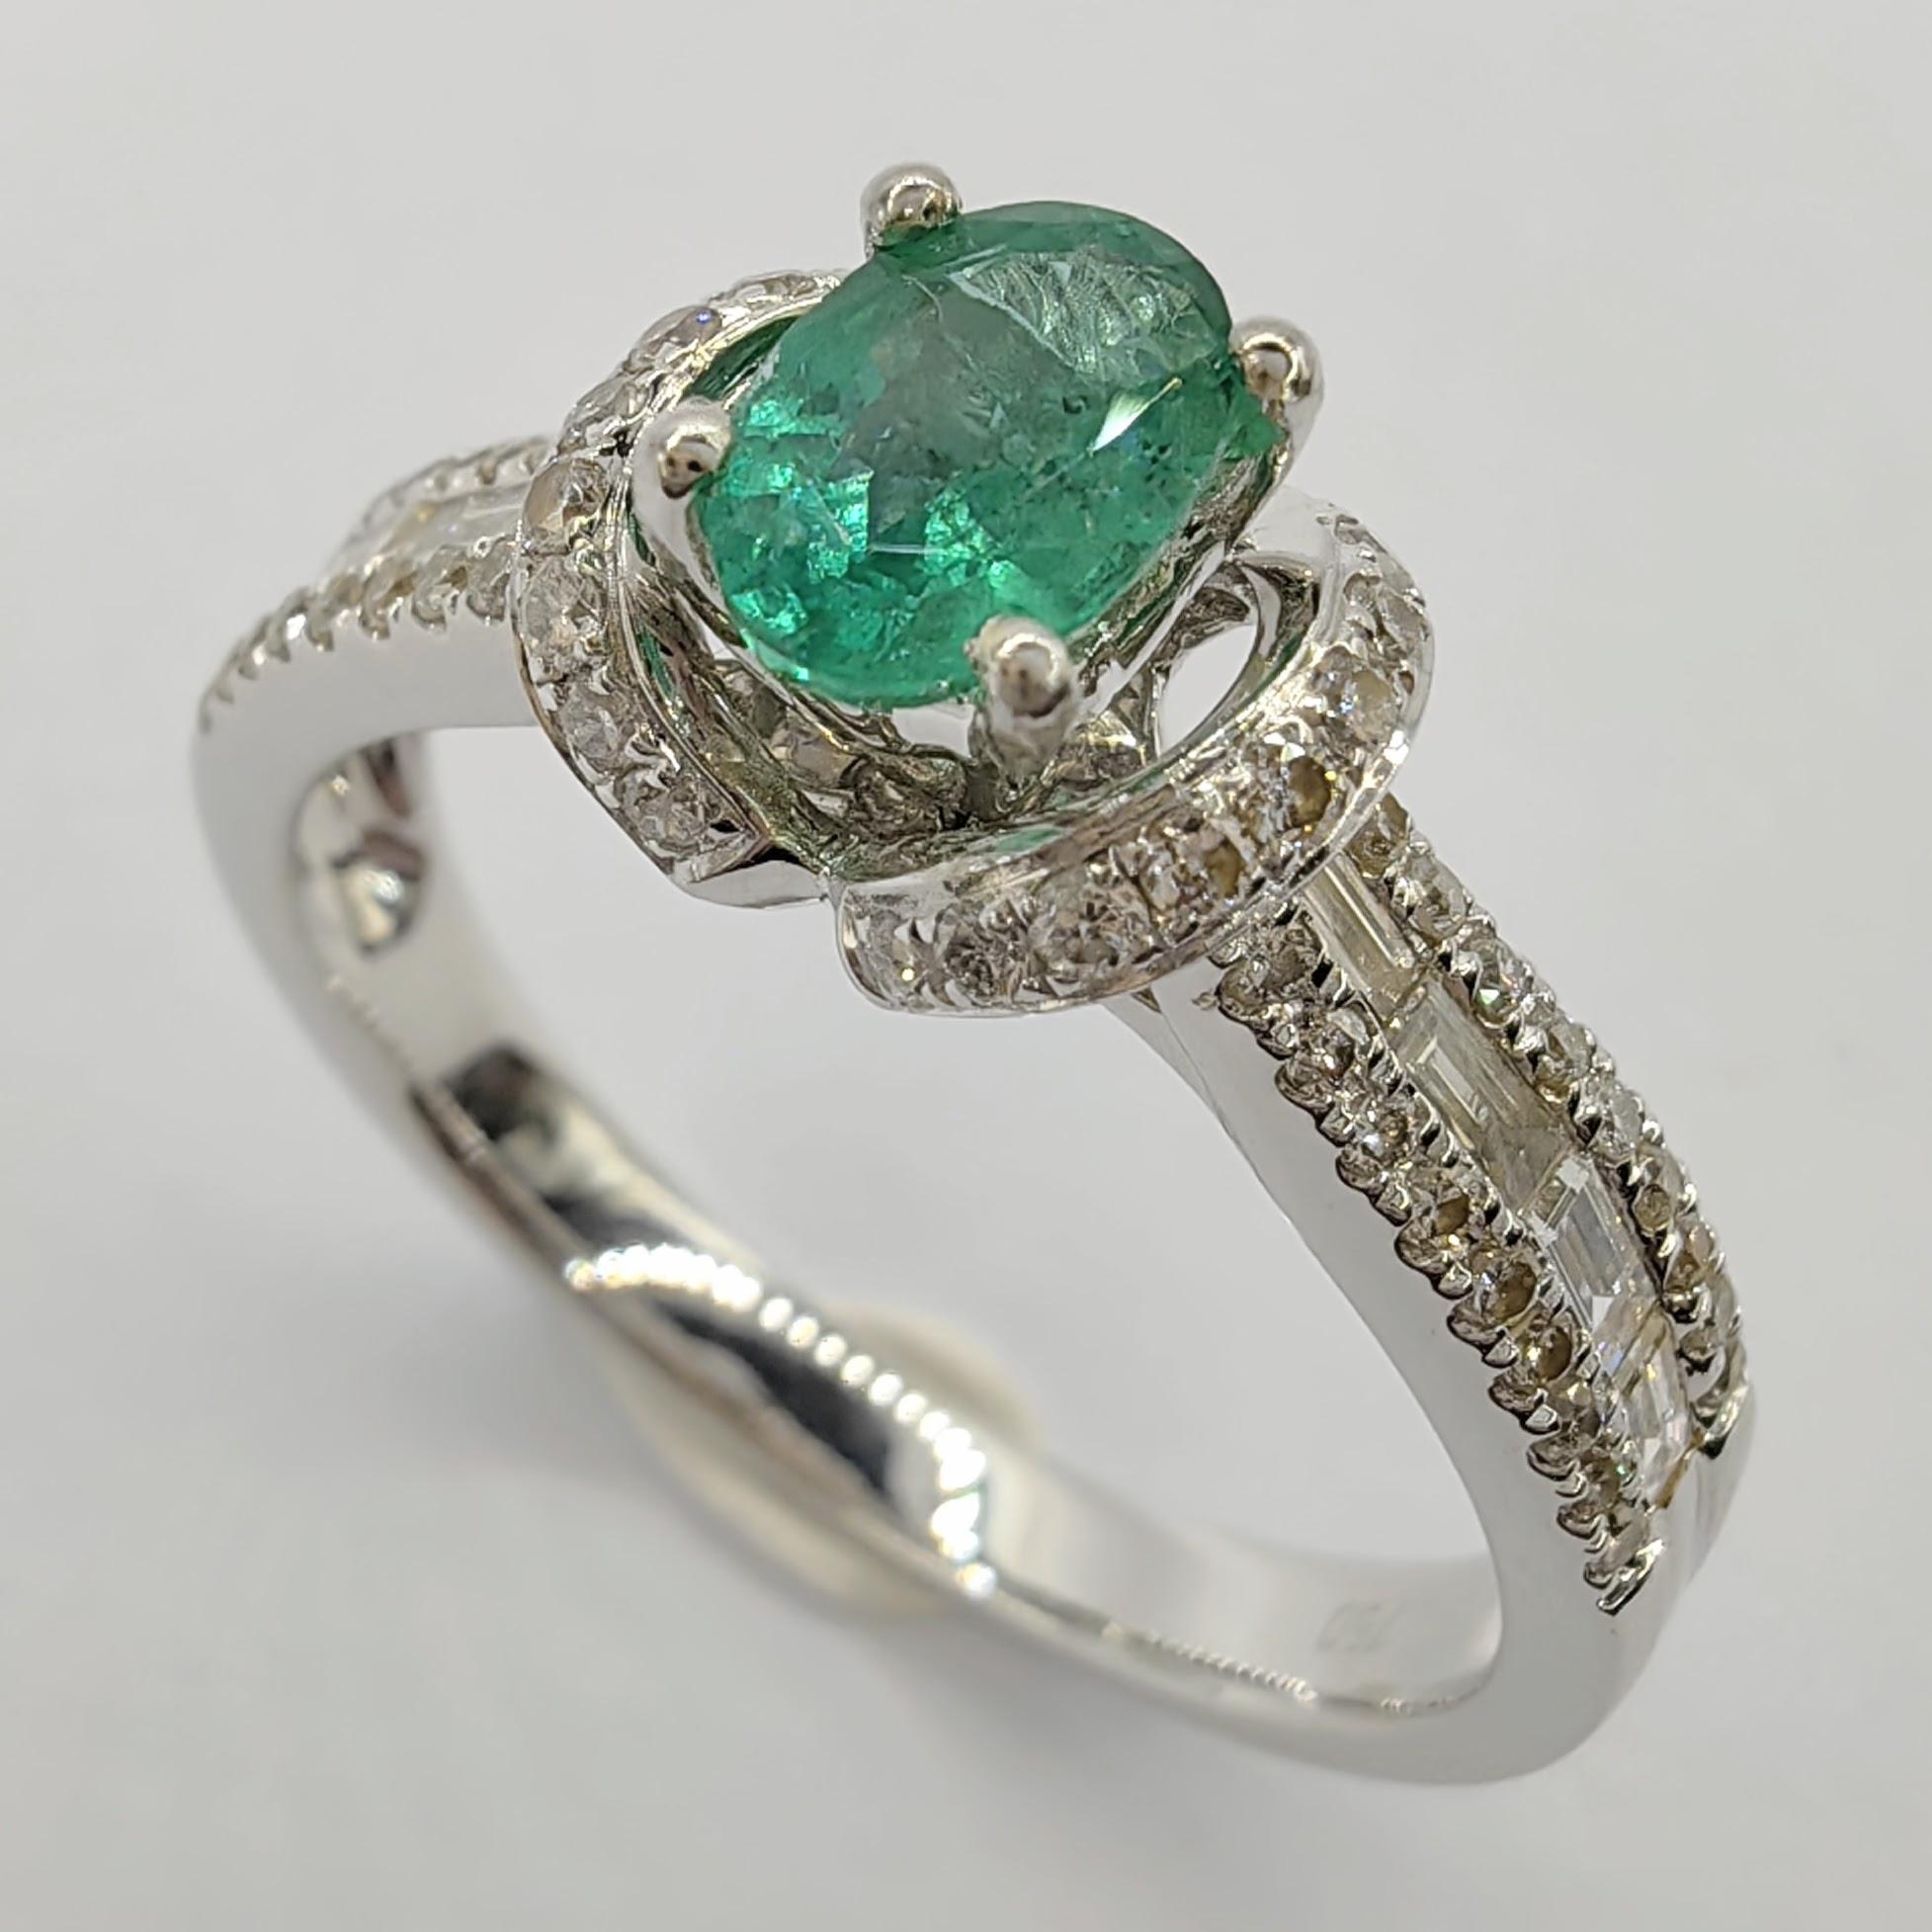 Introducing our exquisite Oval-Cut Emerald & Diamond Multi-Row Pavé Statement Ring in 18k White Gold, a true masterpiece that embodies elegance and sophistication.

At the center of this captivating ring is a stunning oval-cut emerald, weighing 0.40